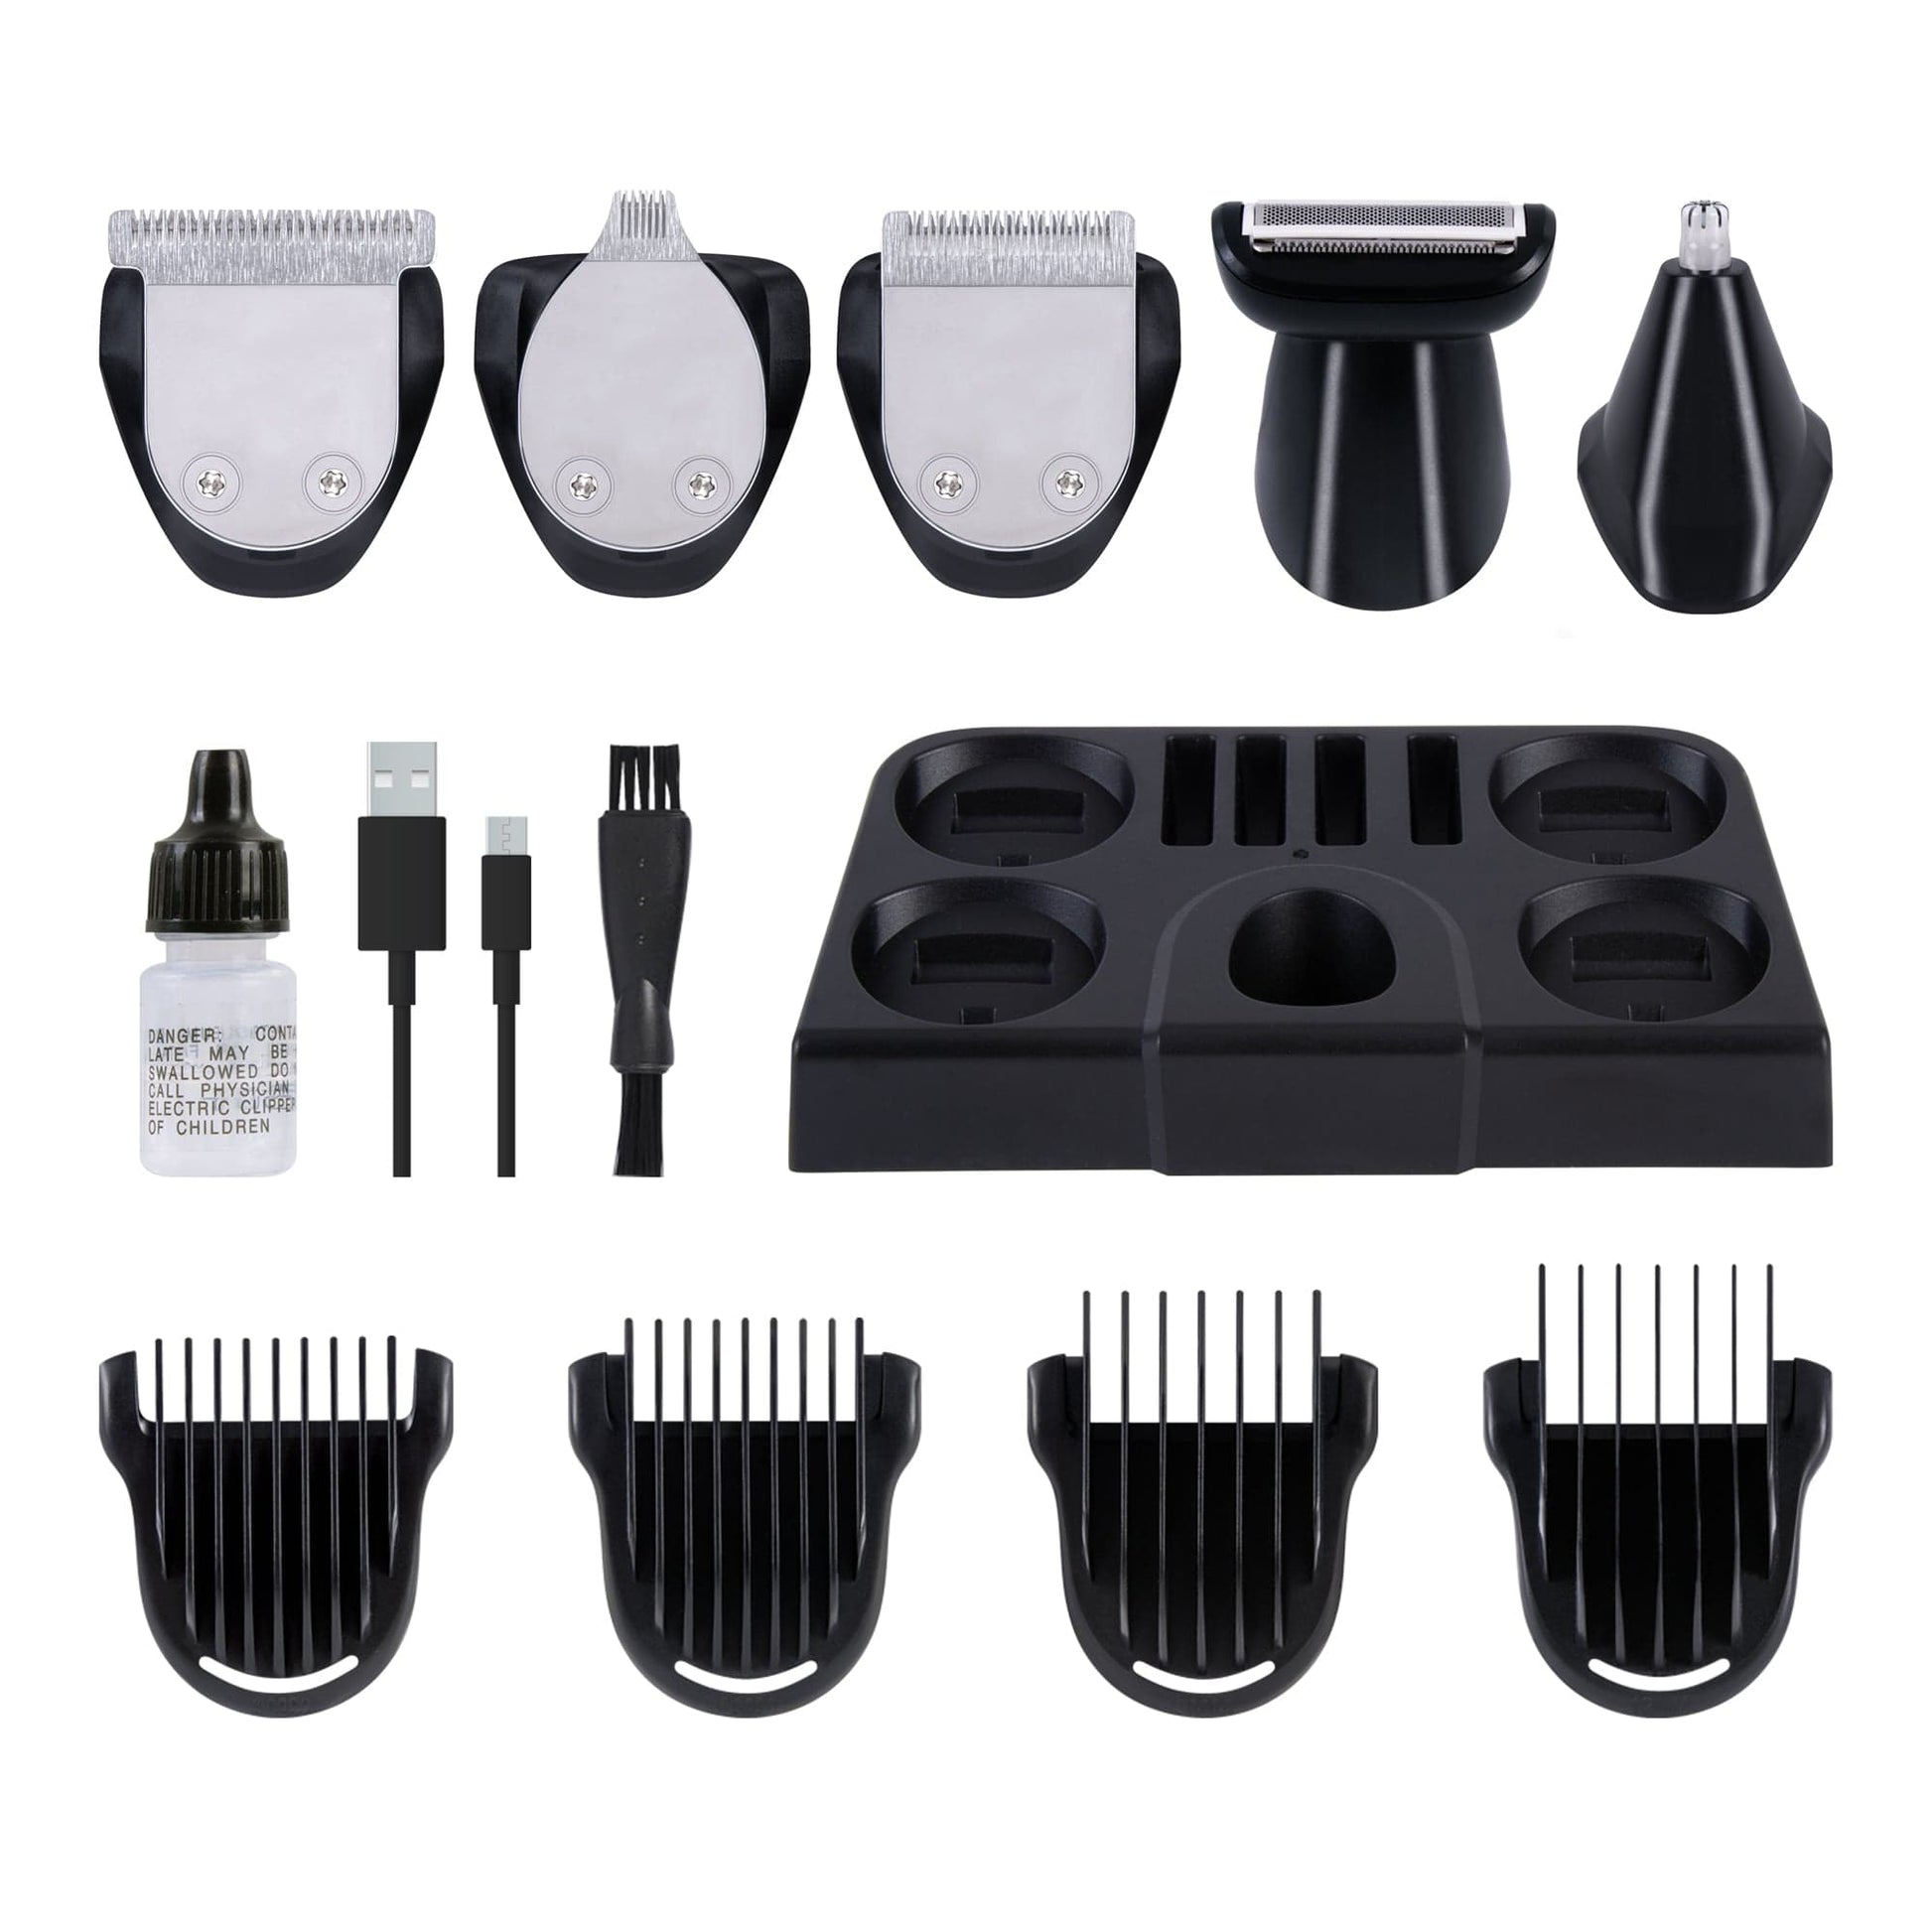 Remology personal care 5 IN 1 Rechargeable Grooming Kit